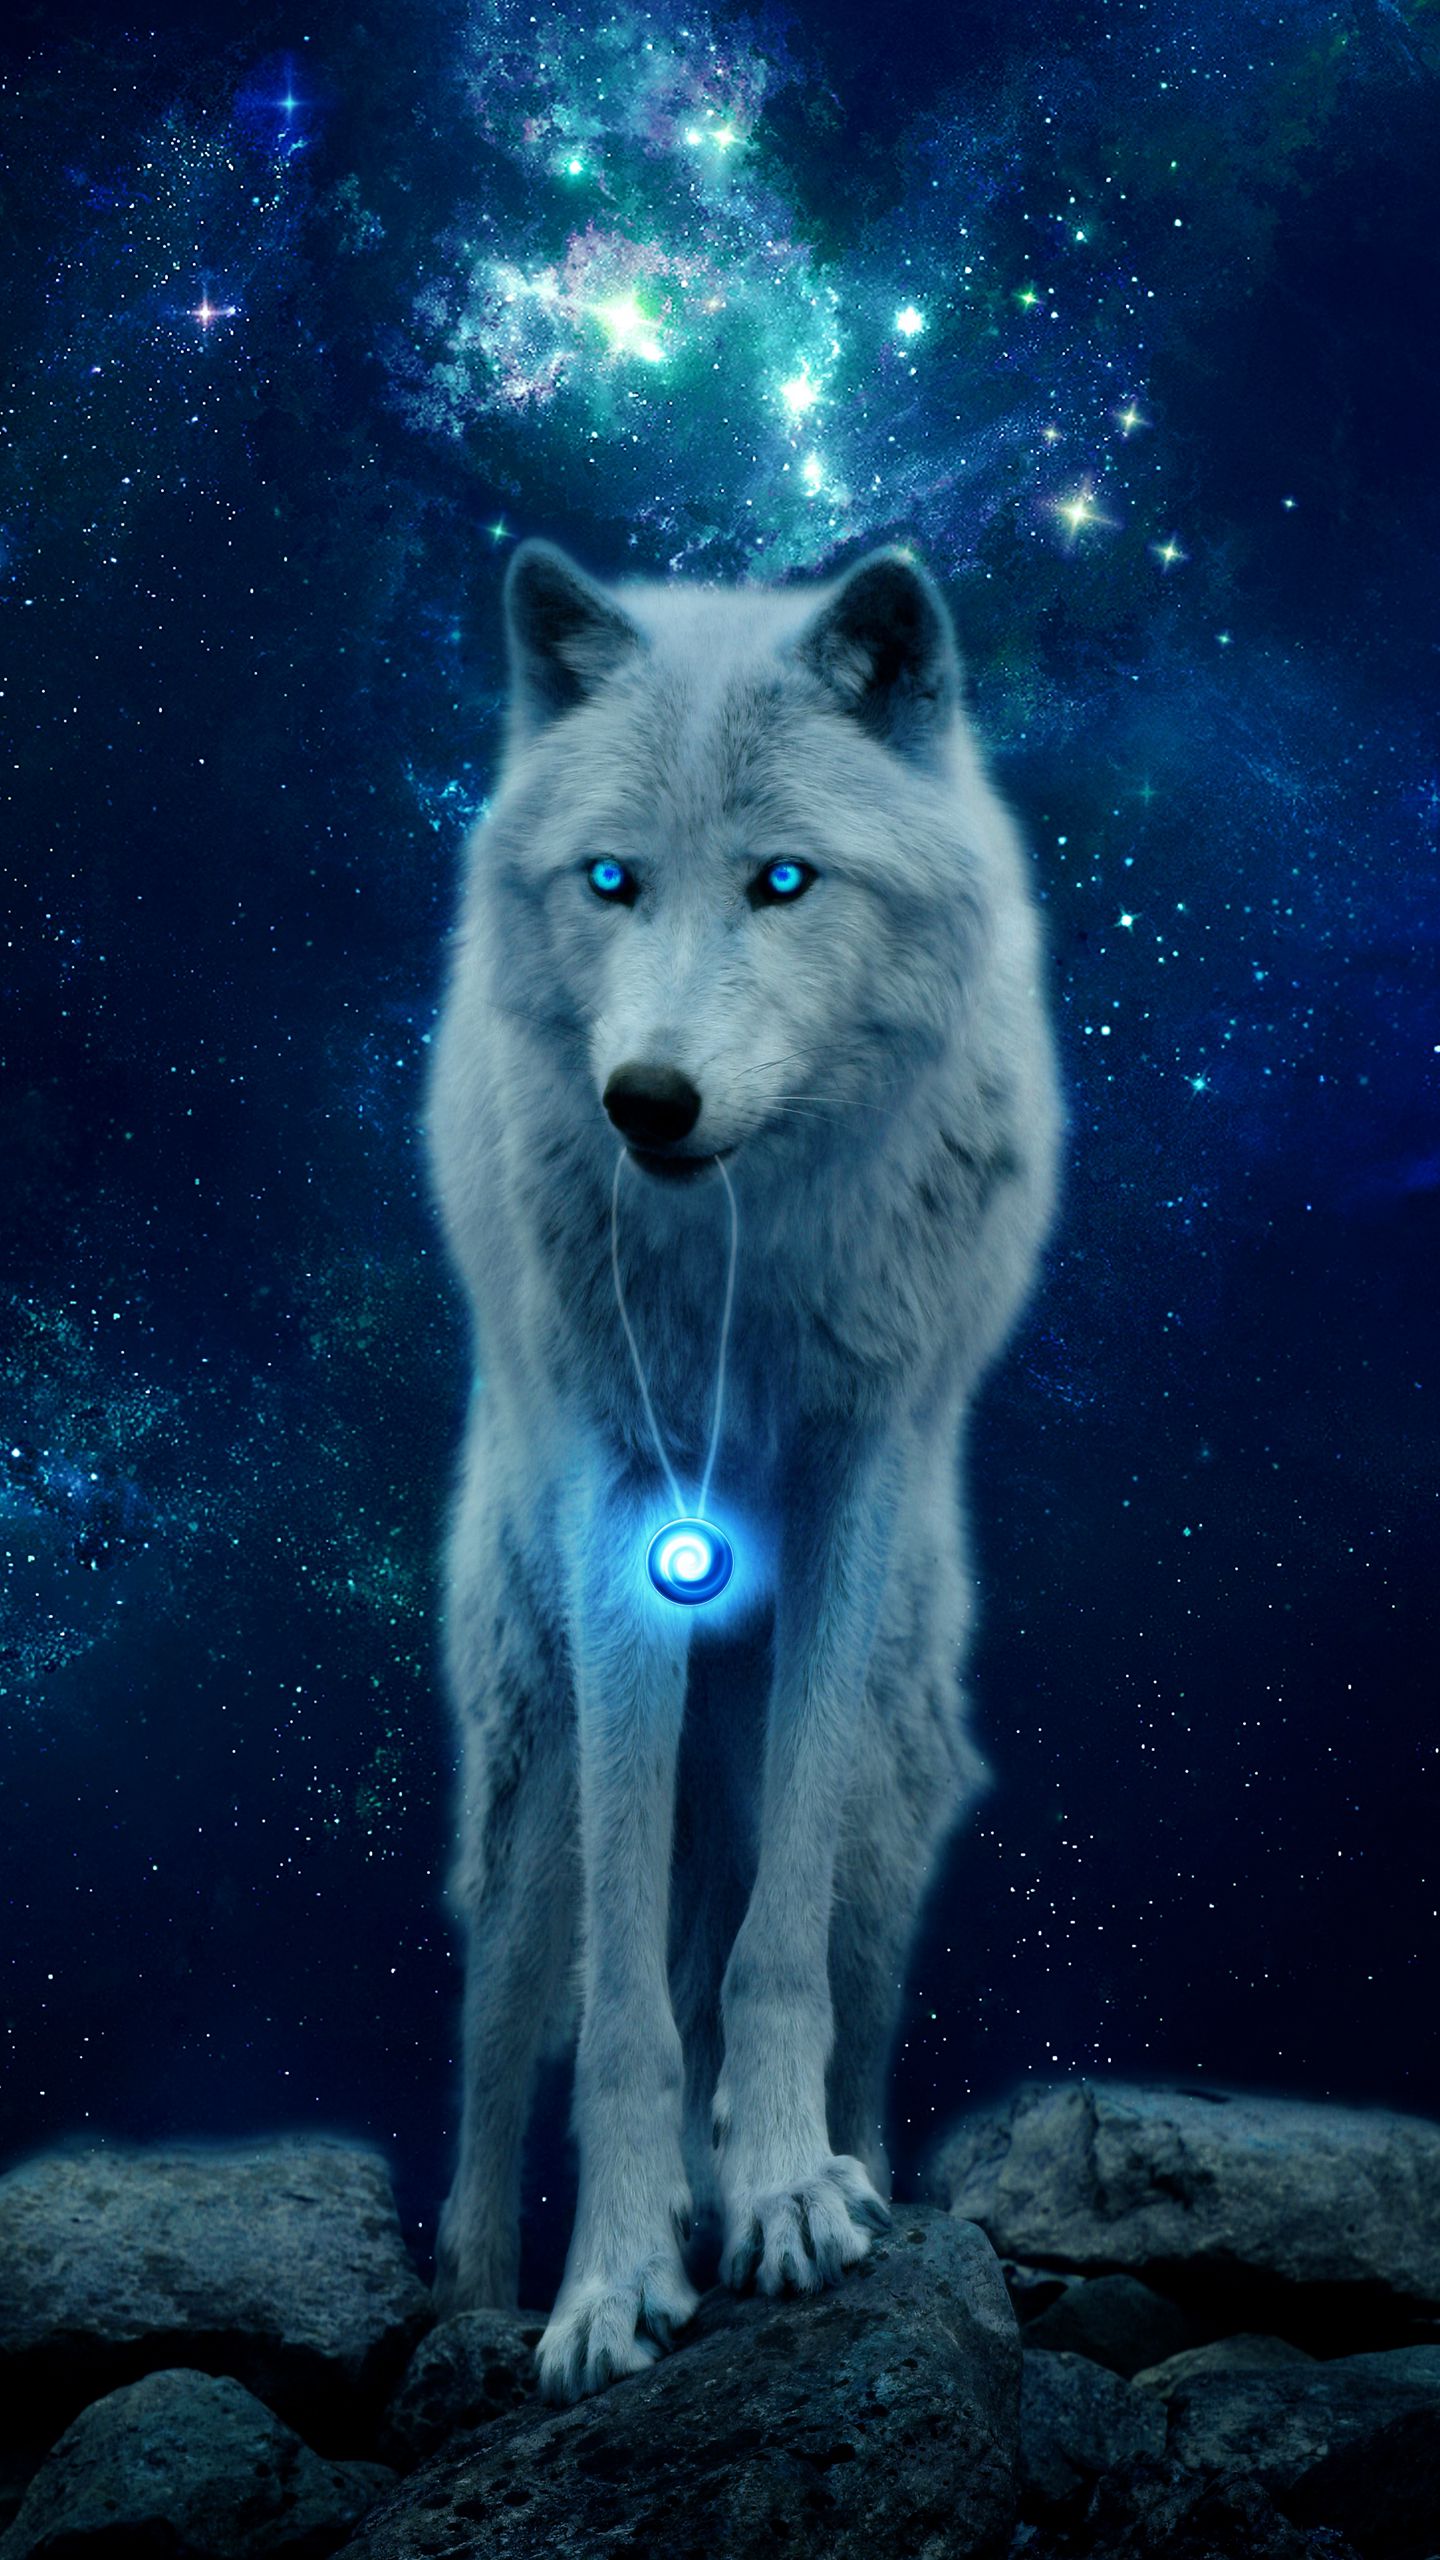 Download wallpapers blue wolf art painted wolf predator forest neon  wolf for desktop free Pictures for desktop free